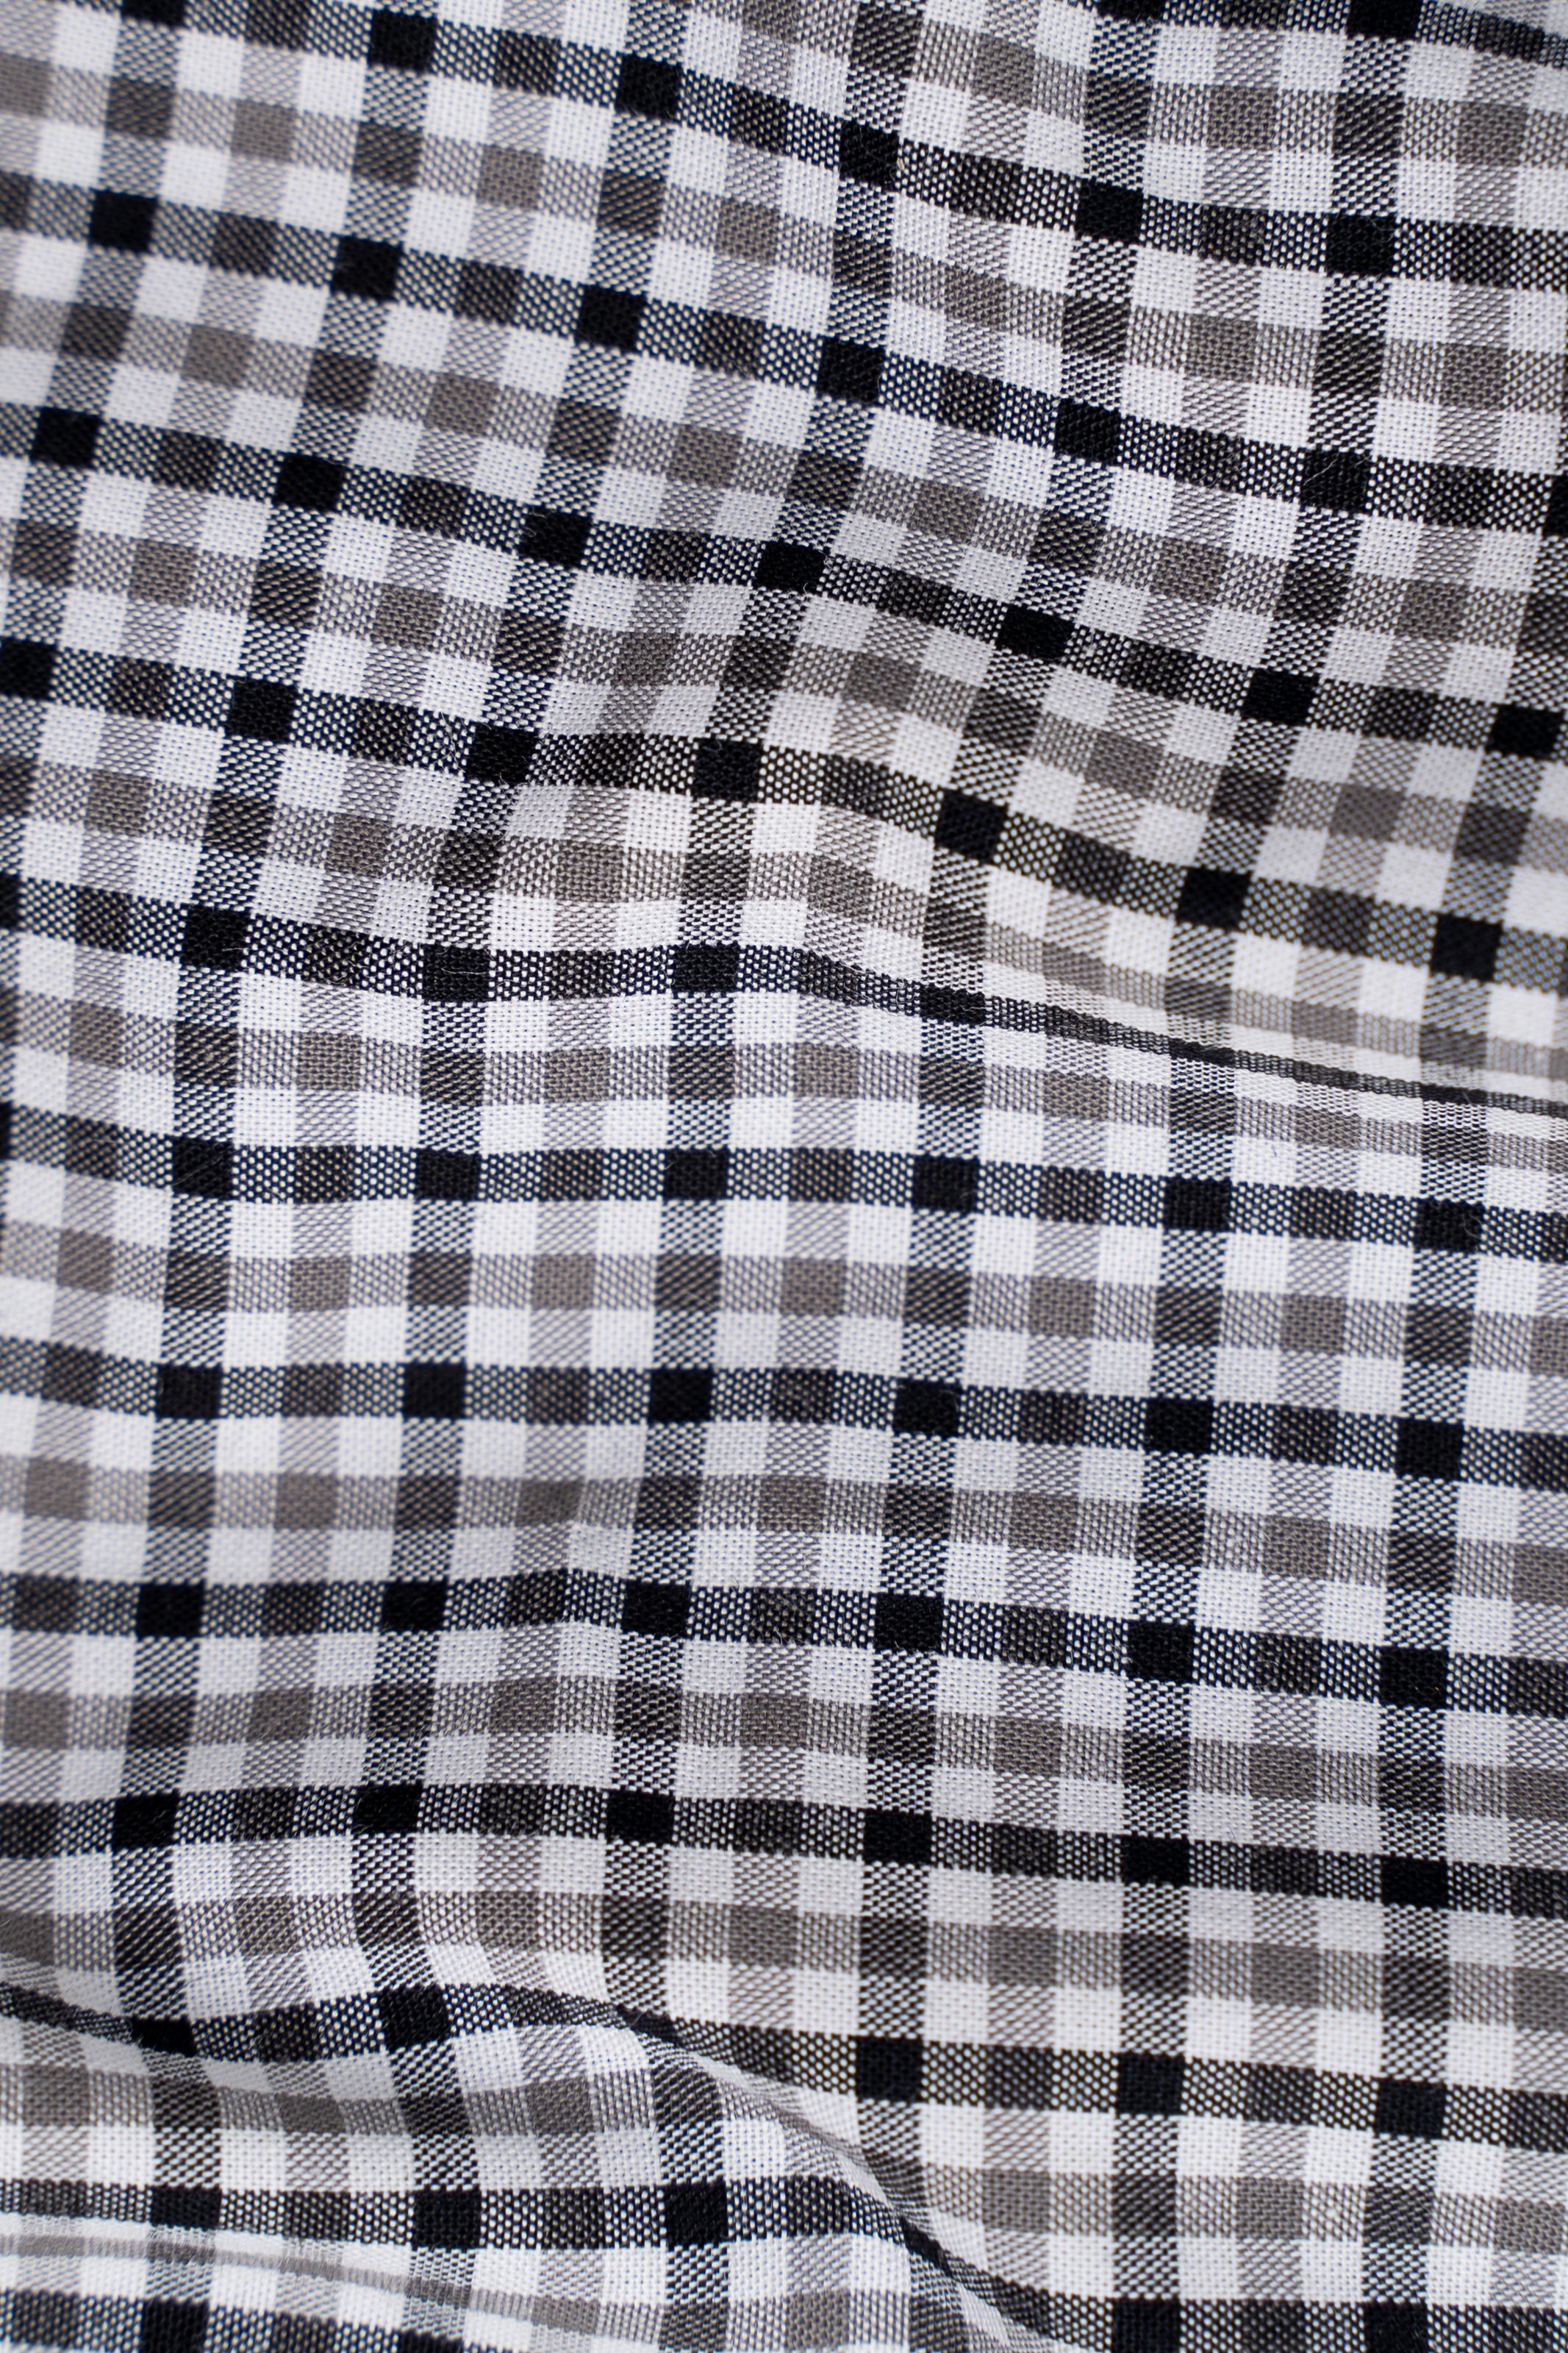 LIMITED EDITION SHIRTS BLACK WHITE CHECK